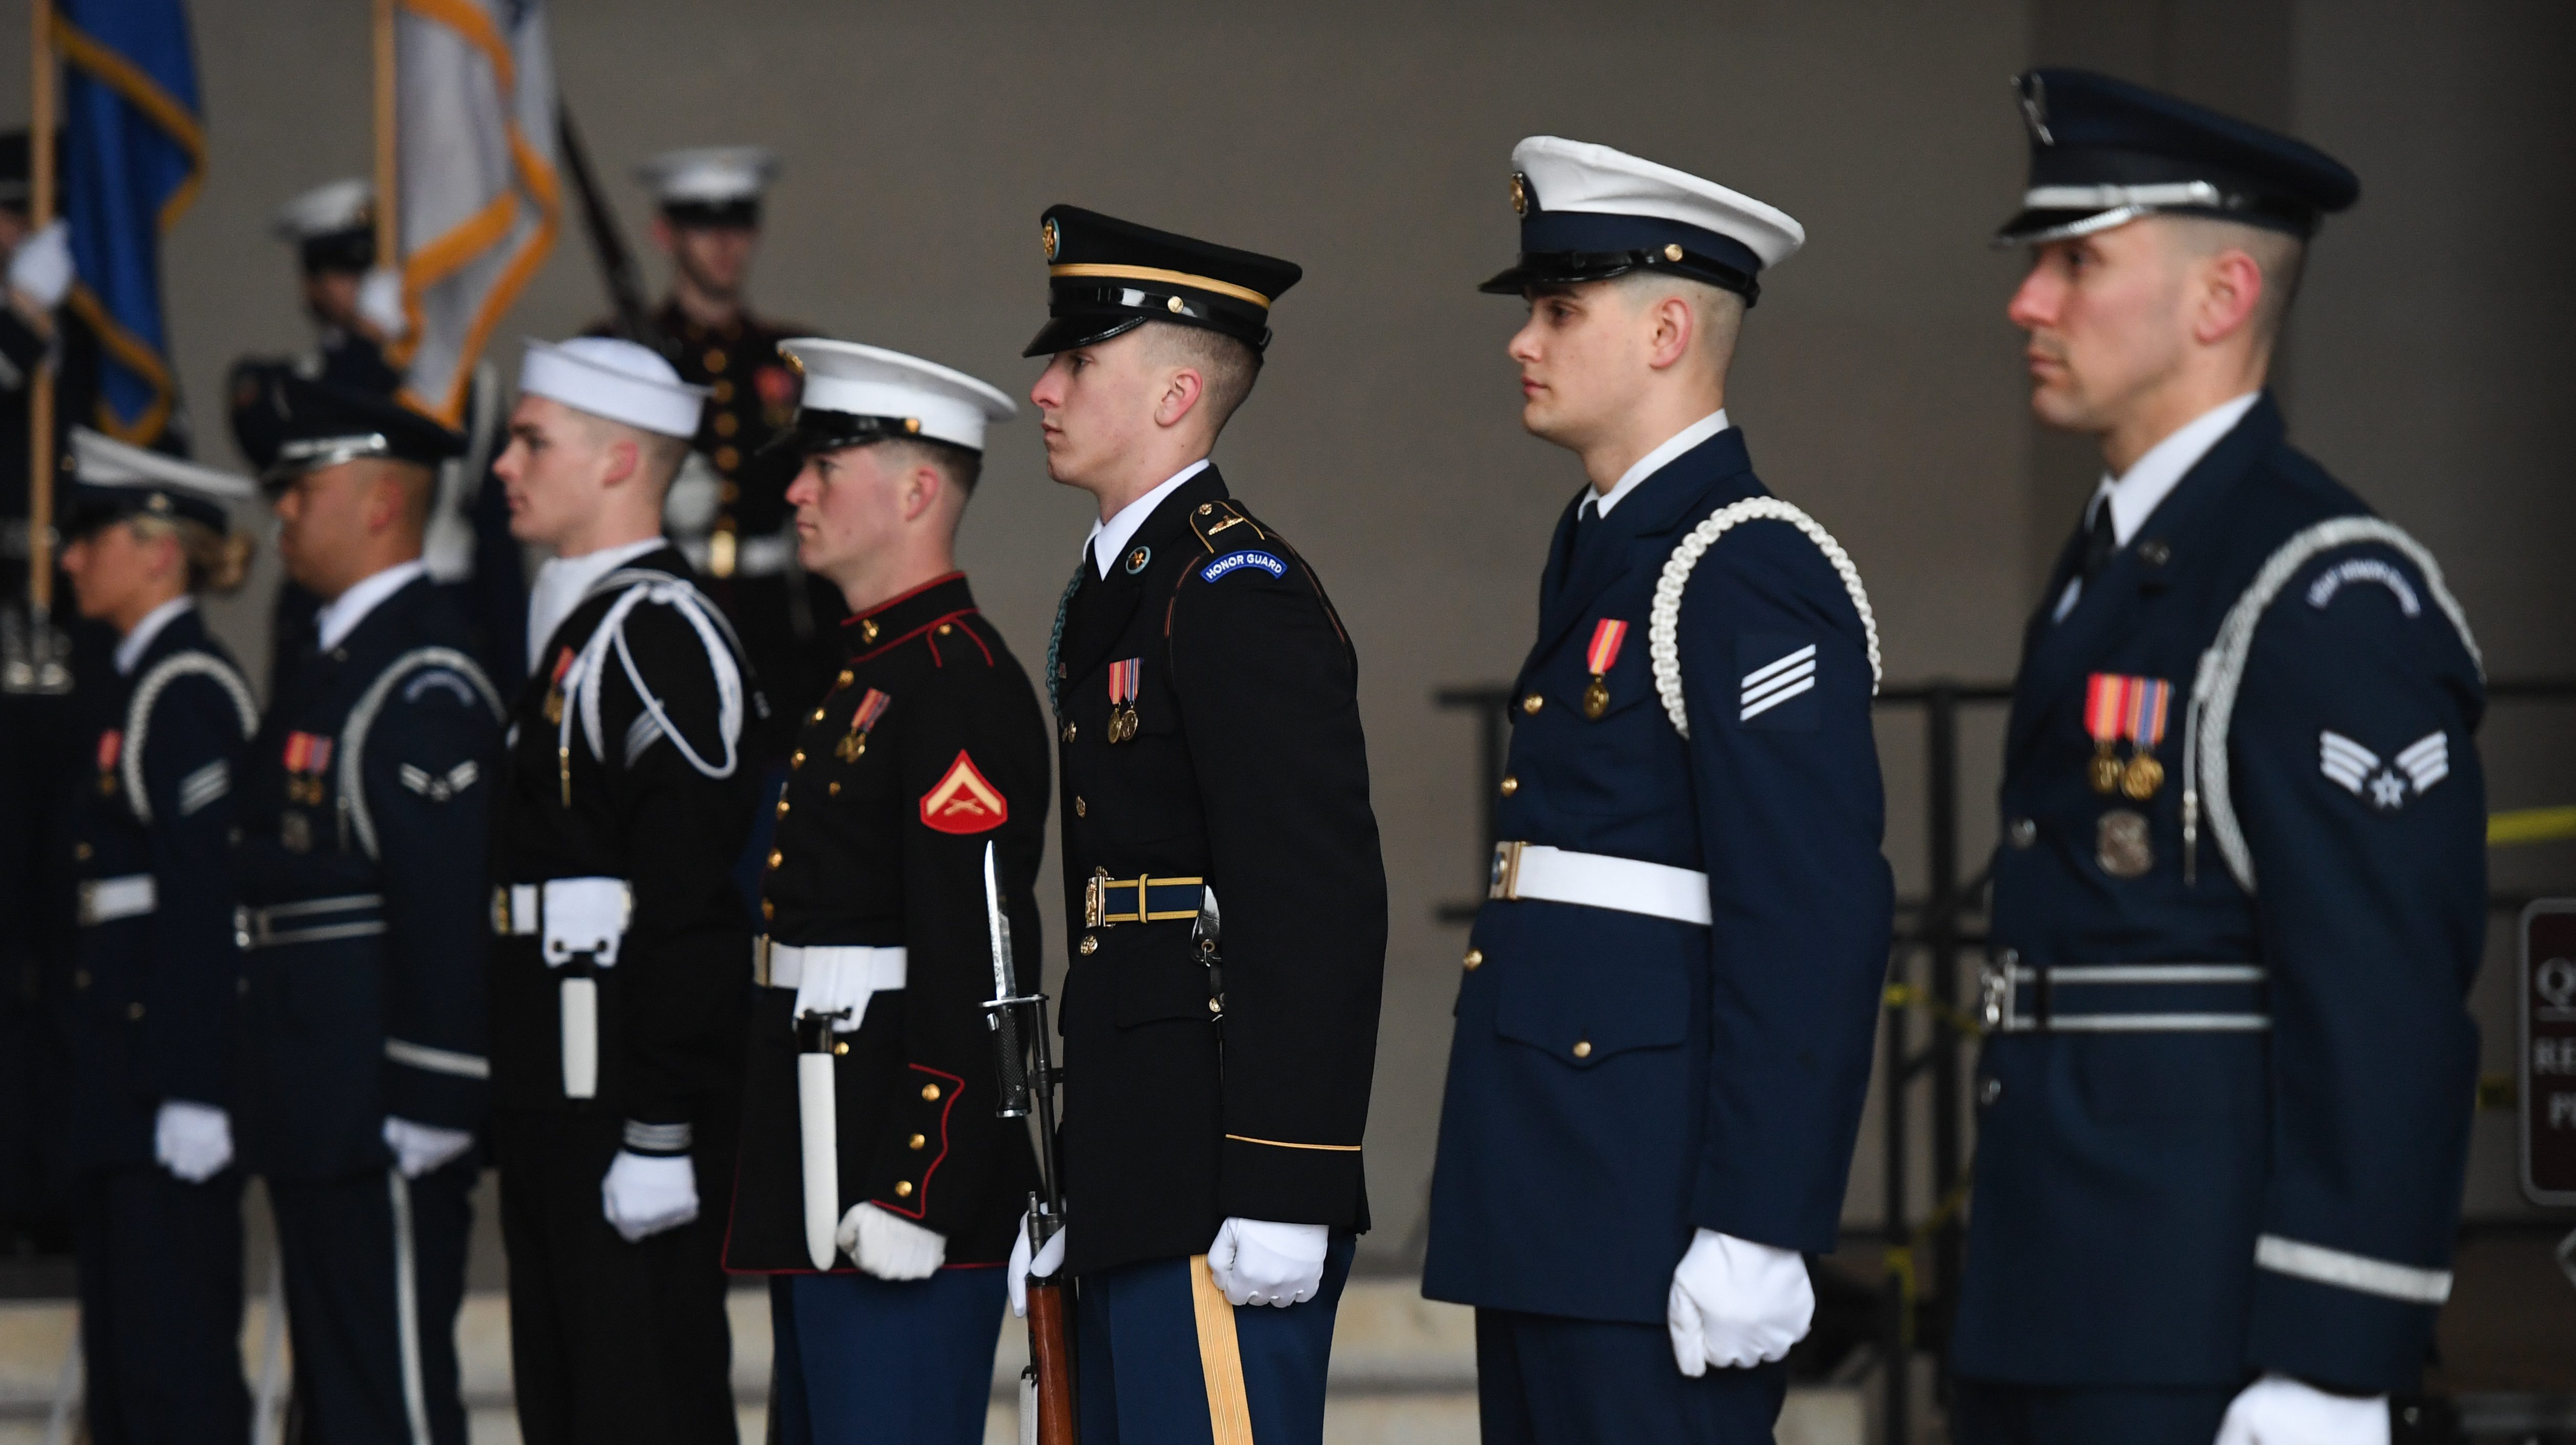 Members of the Joint Armed Forces Honor Guard file out of the Lincoln Memorial during the Armed Forces Full Honor Wreath Ceremony in honor of President Abraham Lincoln's 210th birthday at the Lincoln Memorial in Washington, D.C., on Feb. 12, 2019. (U.S. Army photo by Spc. Dana Clarke)